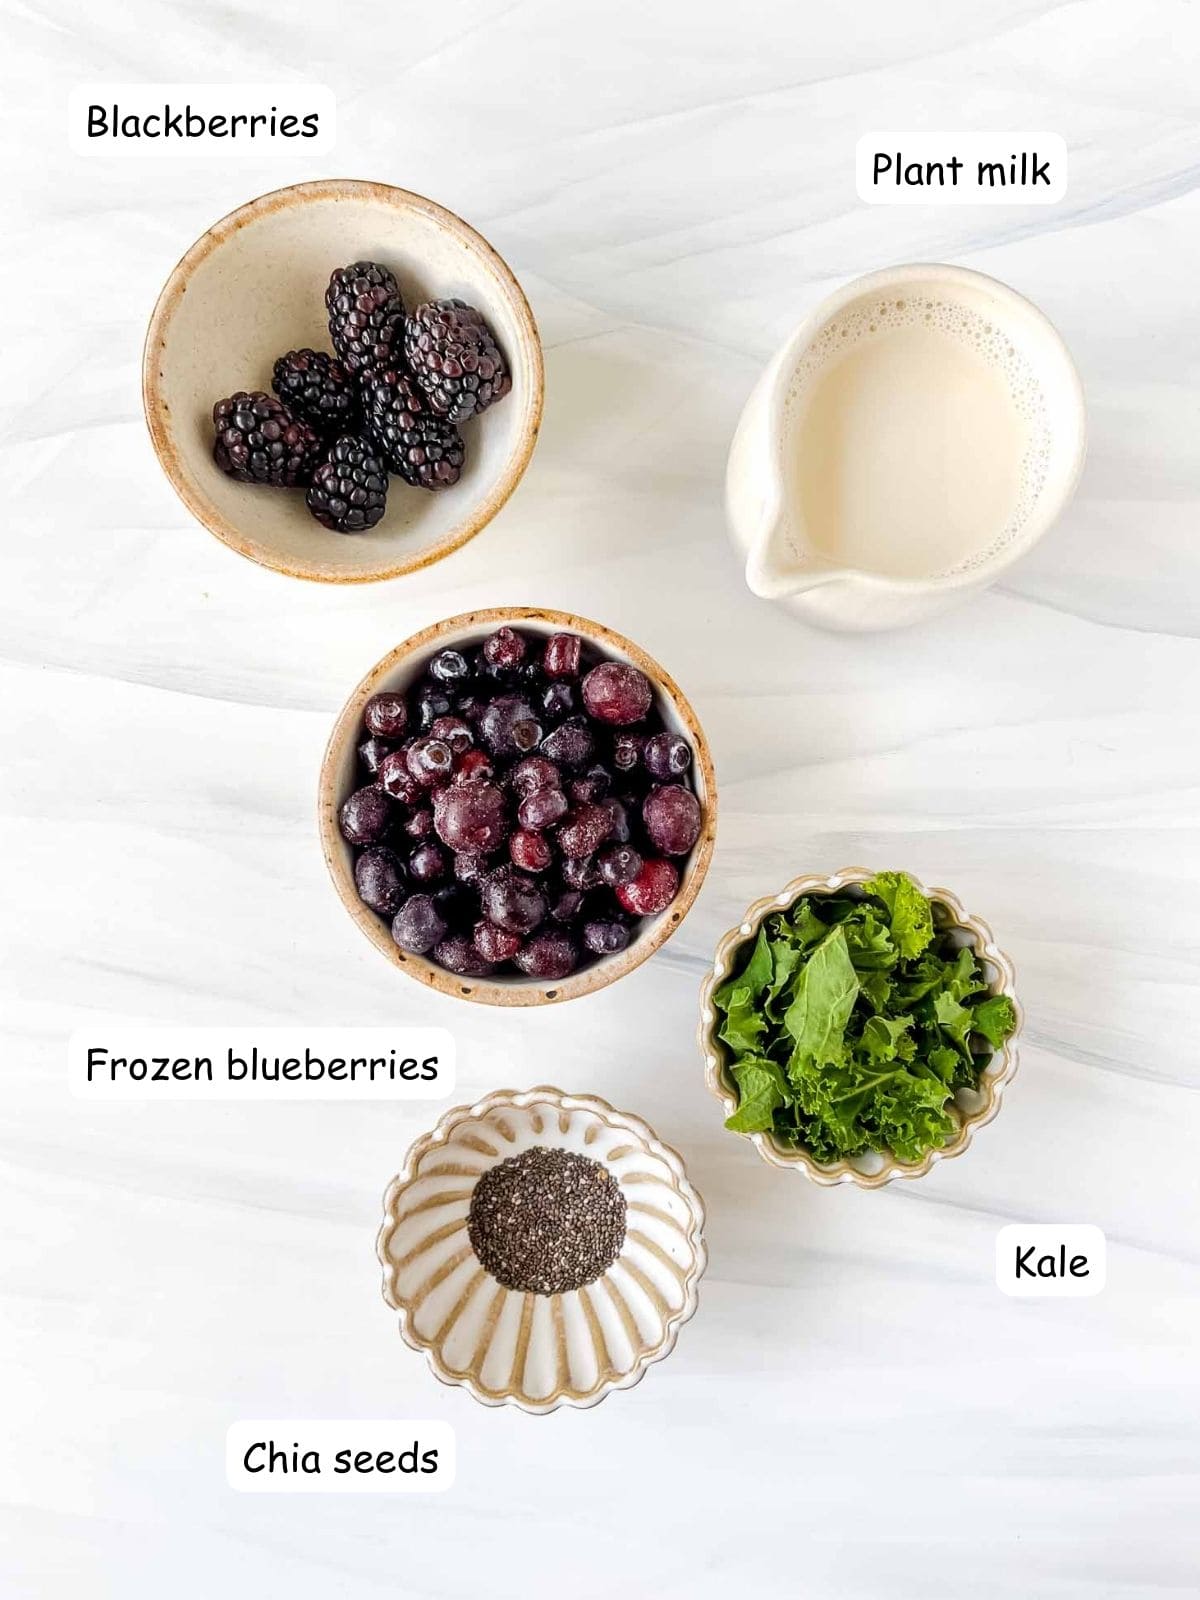 individually labelled ingredients in bowls including blackberries, frozen blueberries, kale and chia seeds and a jug of plant milk.